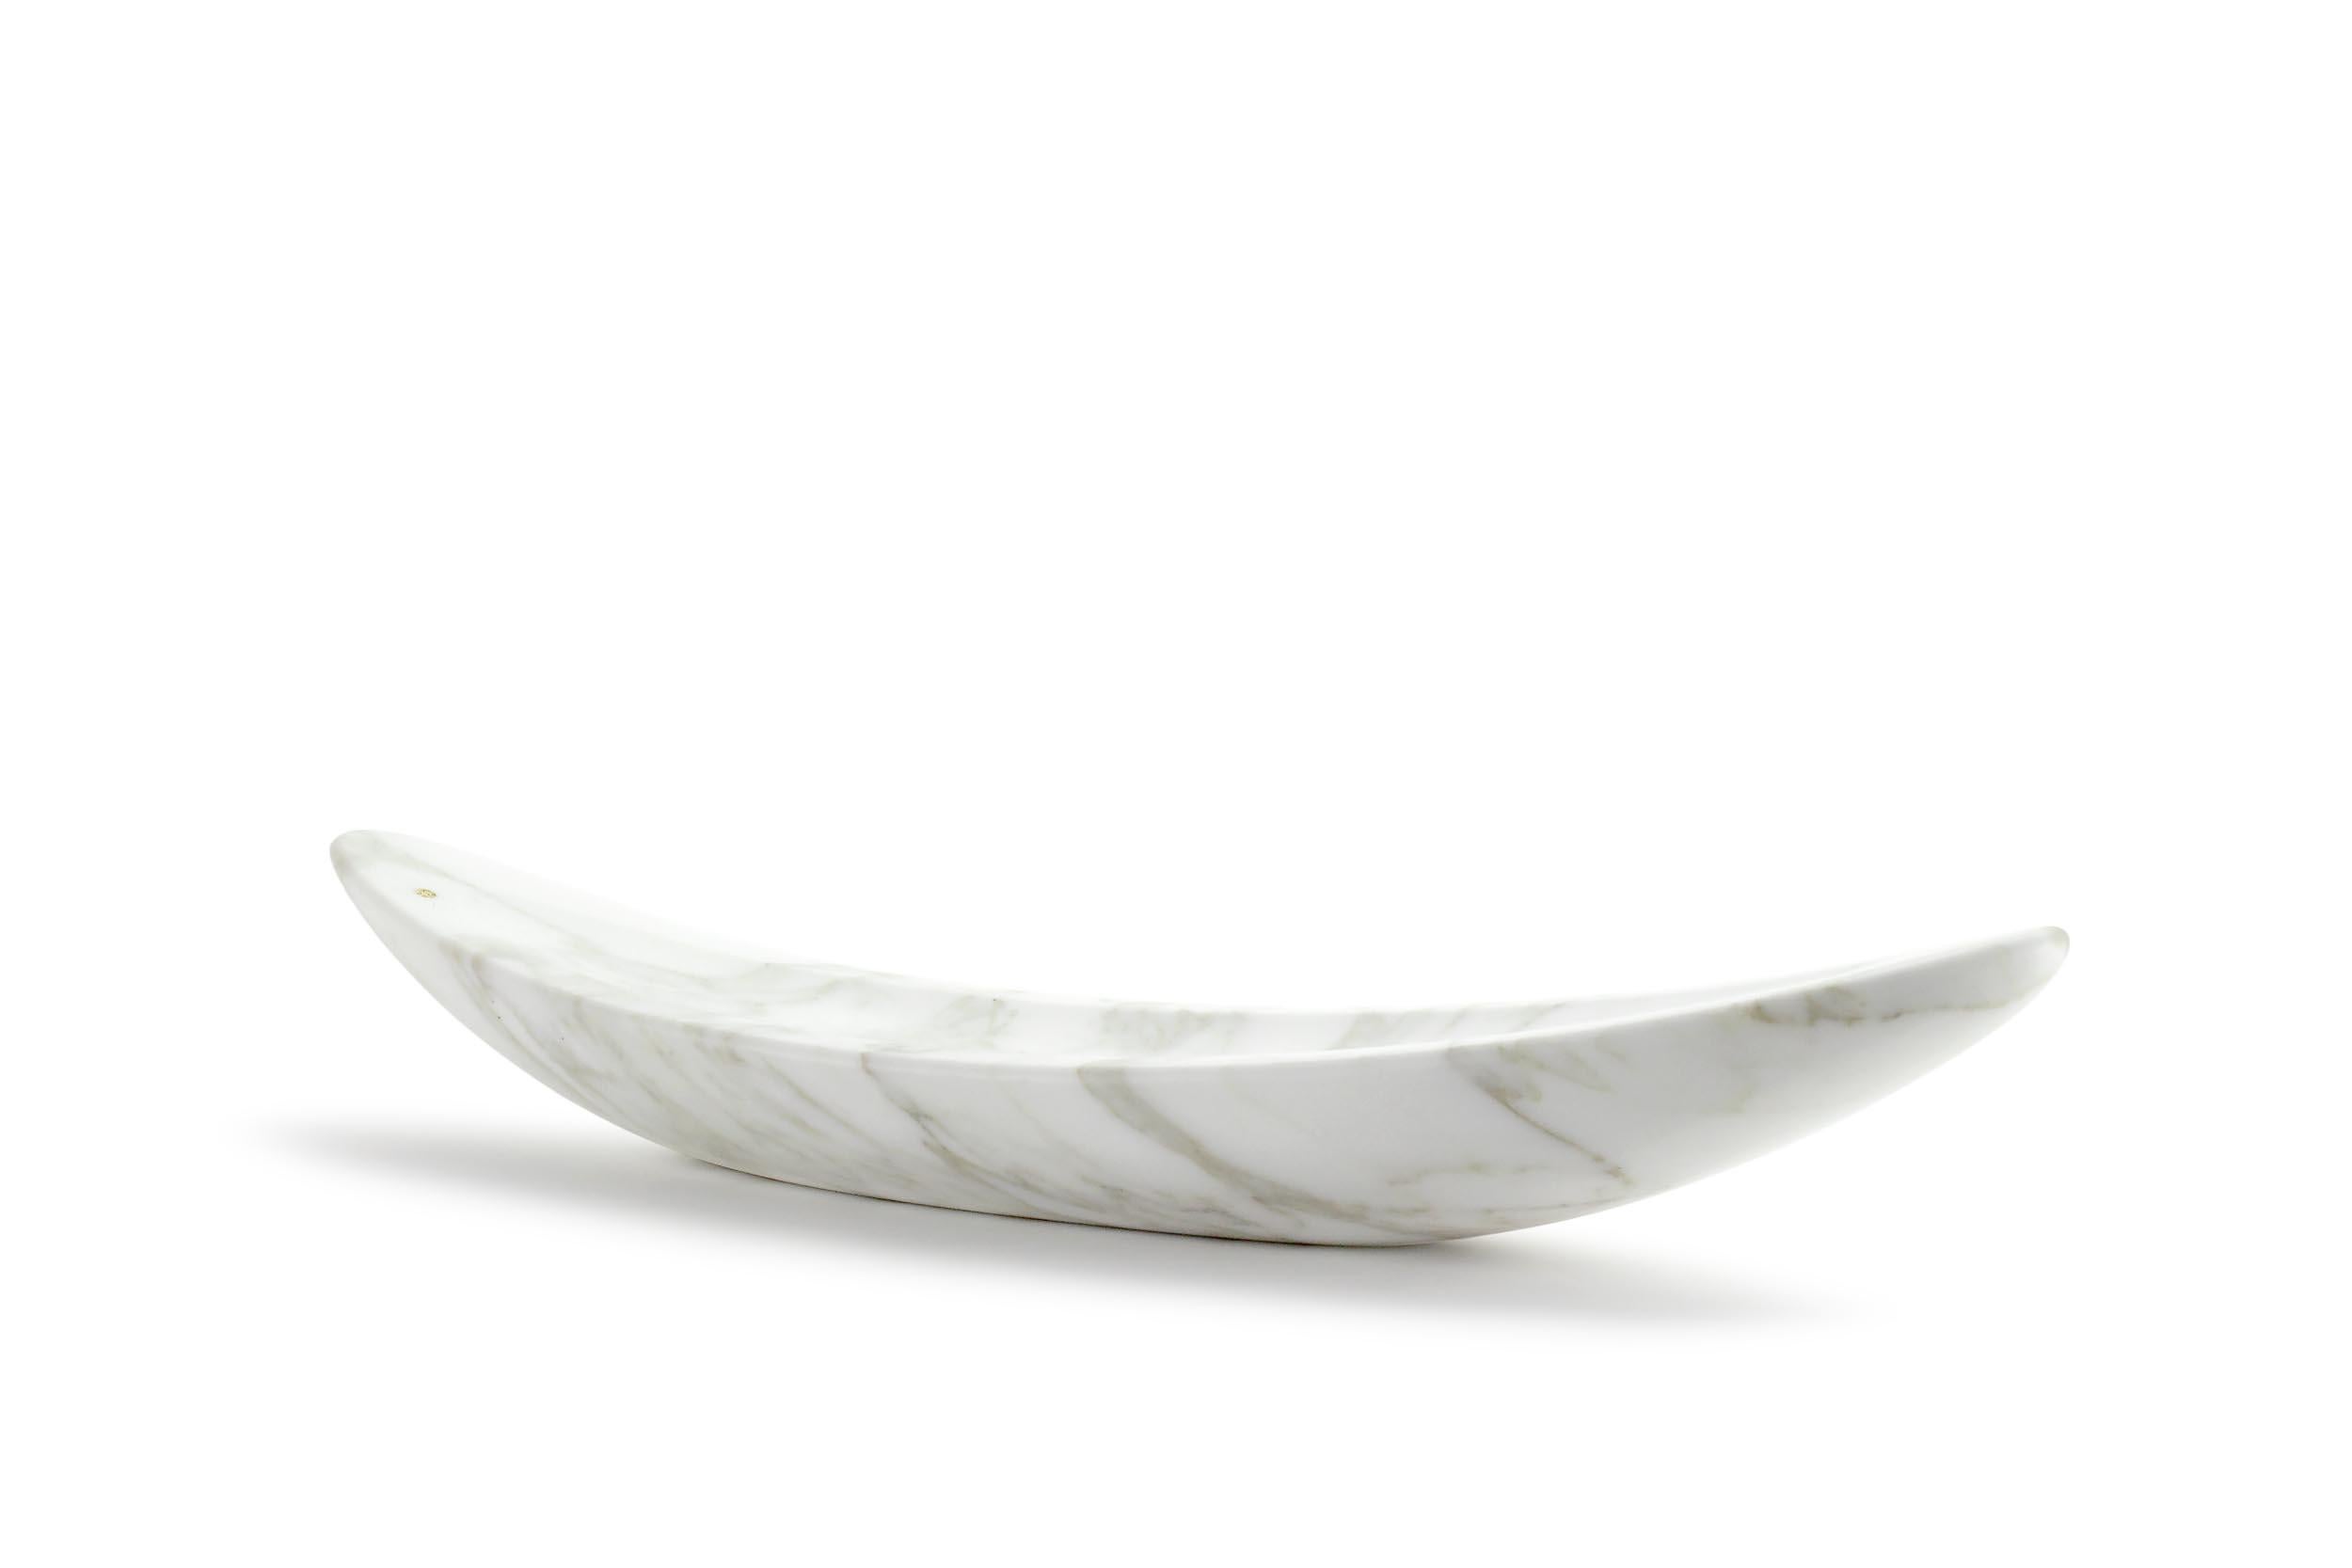 
Gondola, big elegant bowl, hand-sculpted from a solid block of Calacatta marble.

Bowl dimensions: Big L 65 x W 13 x H 11 cm.
Also available: Small L 55 x W 12 x H 9.5 cm.
Available in different marbles, onyx and quartzite.

100% Hand made in